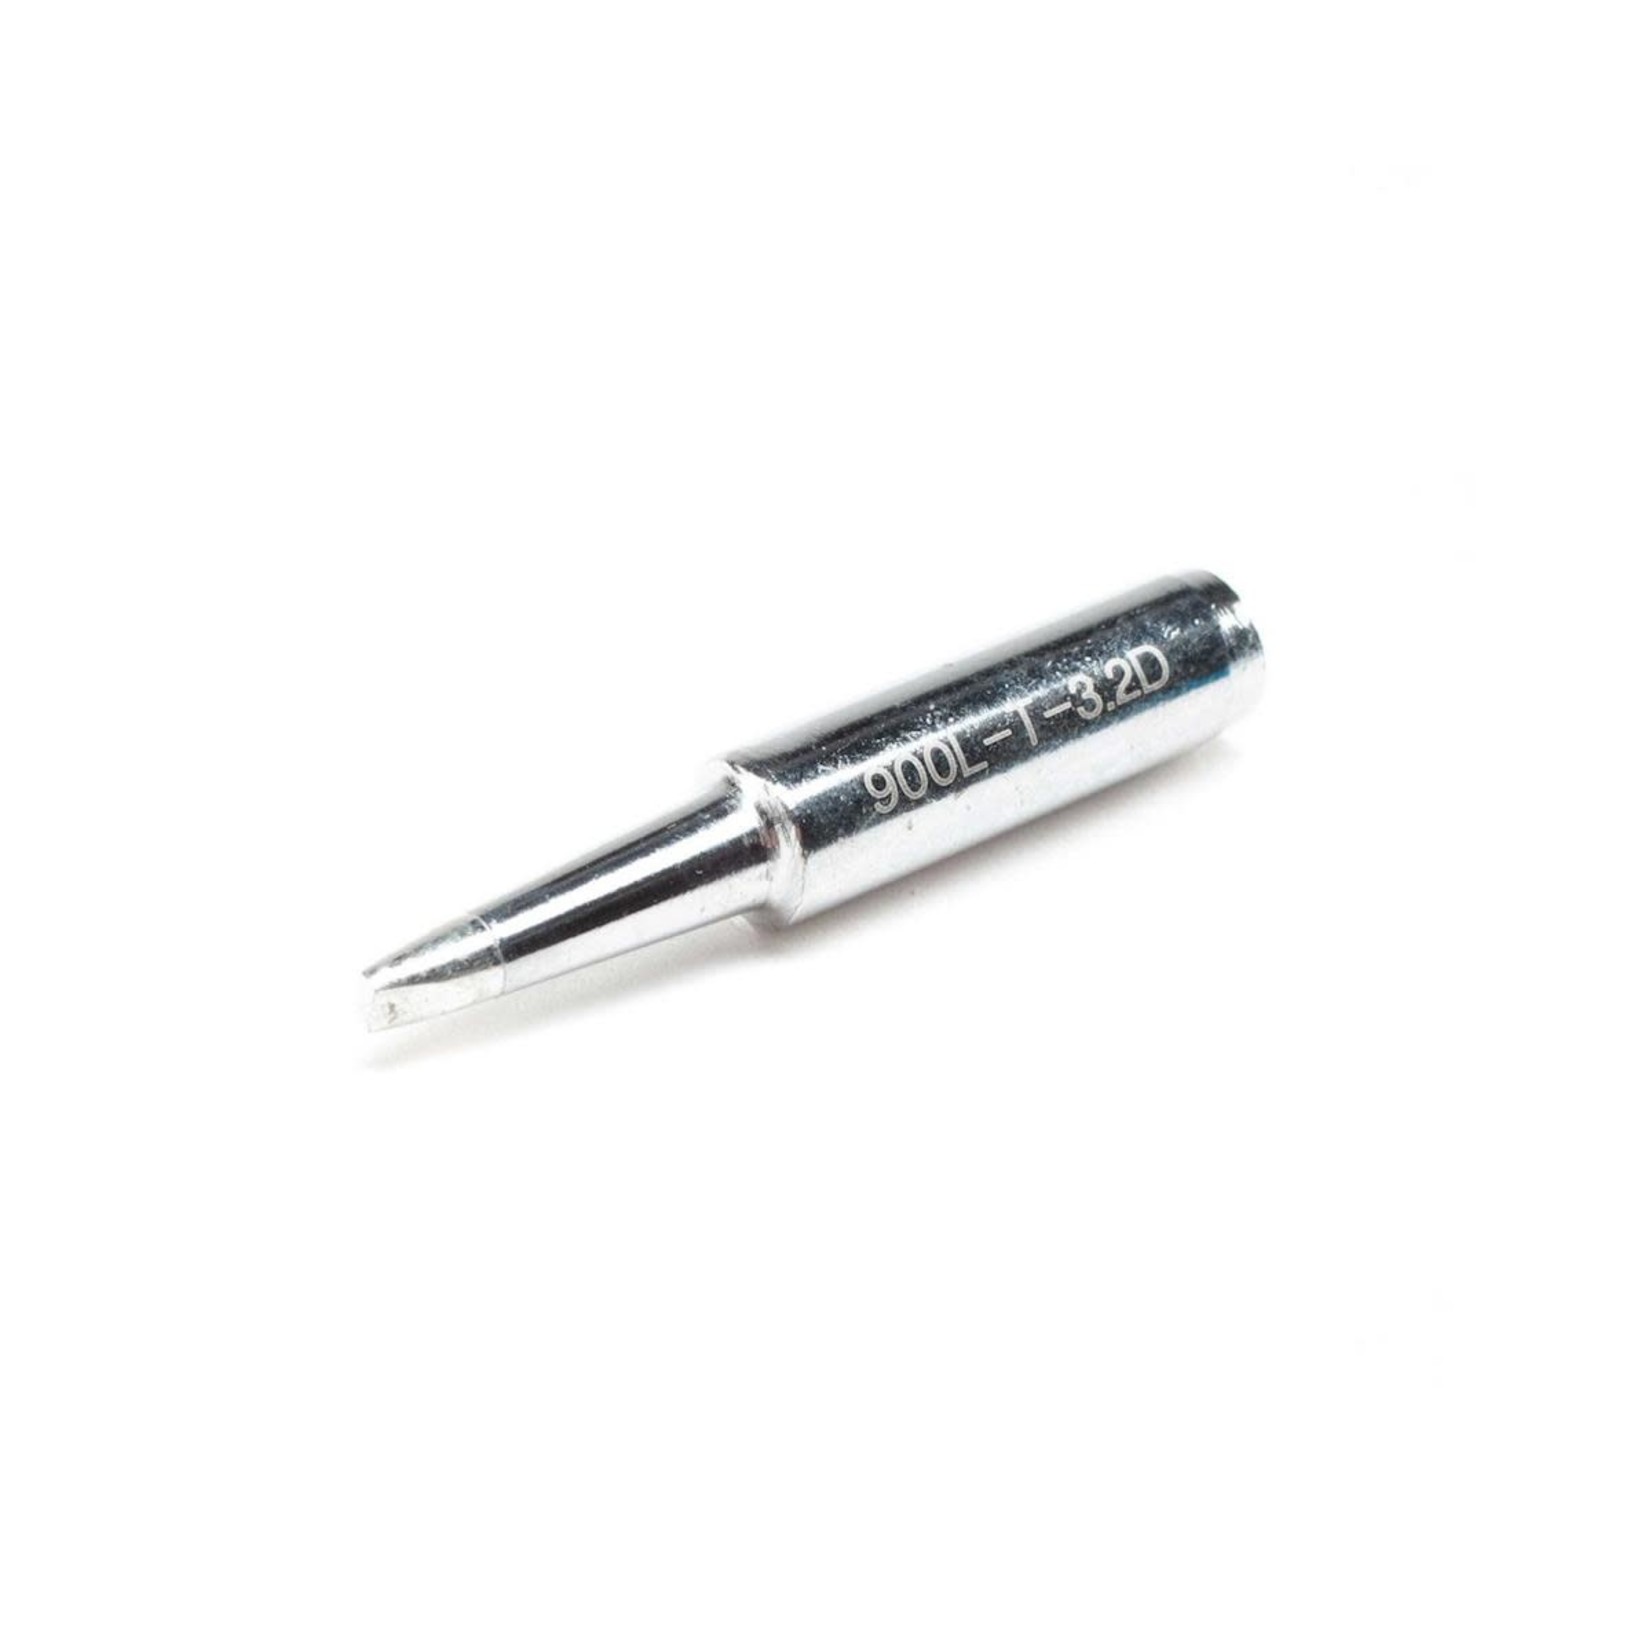 Duratrax Categories related to this product  DuraTrax TrakPower 3.2mm Chisel Tip for TK950 Soldering Station #DTXR0968